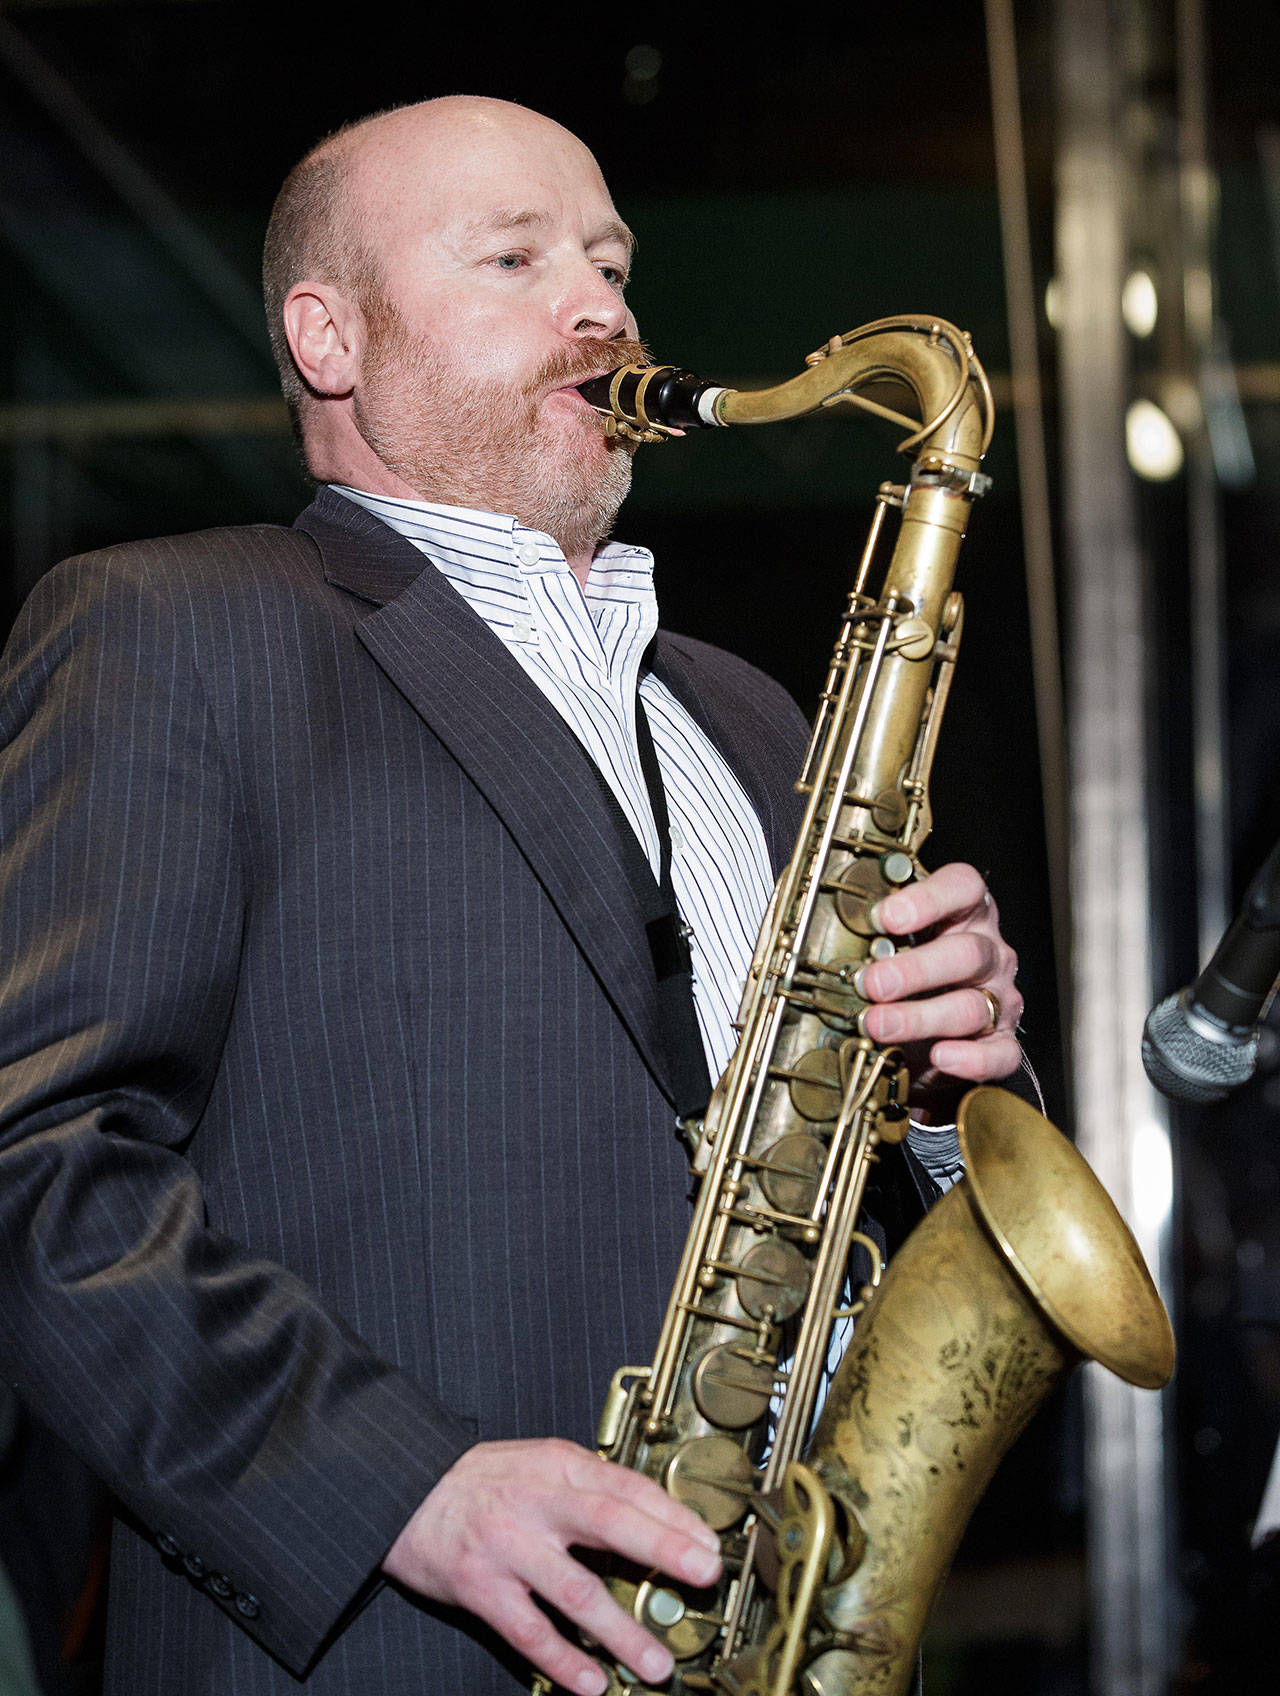 The Michael Brockman Jazz Quartet will perform at 4 p.m. Sunday, Oct. 1 at Waterfront Park Community Center. (Photo courtesy of First Sundays Concerts)